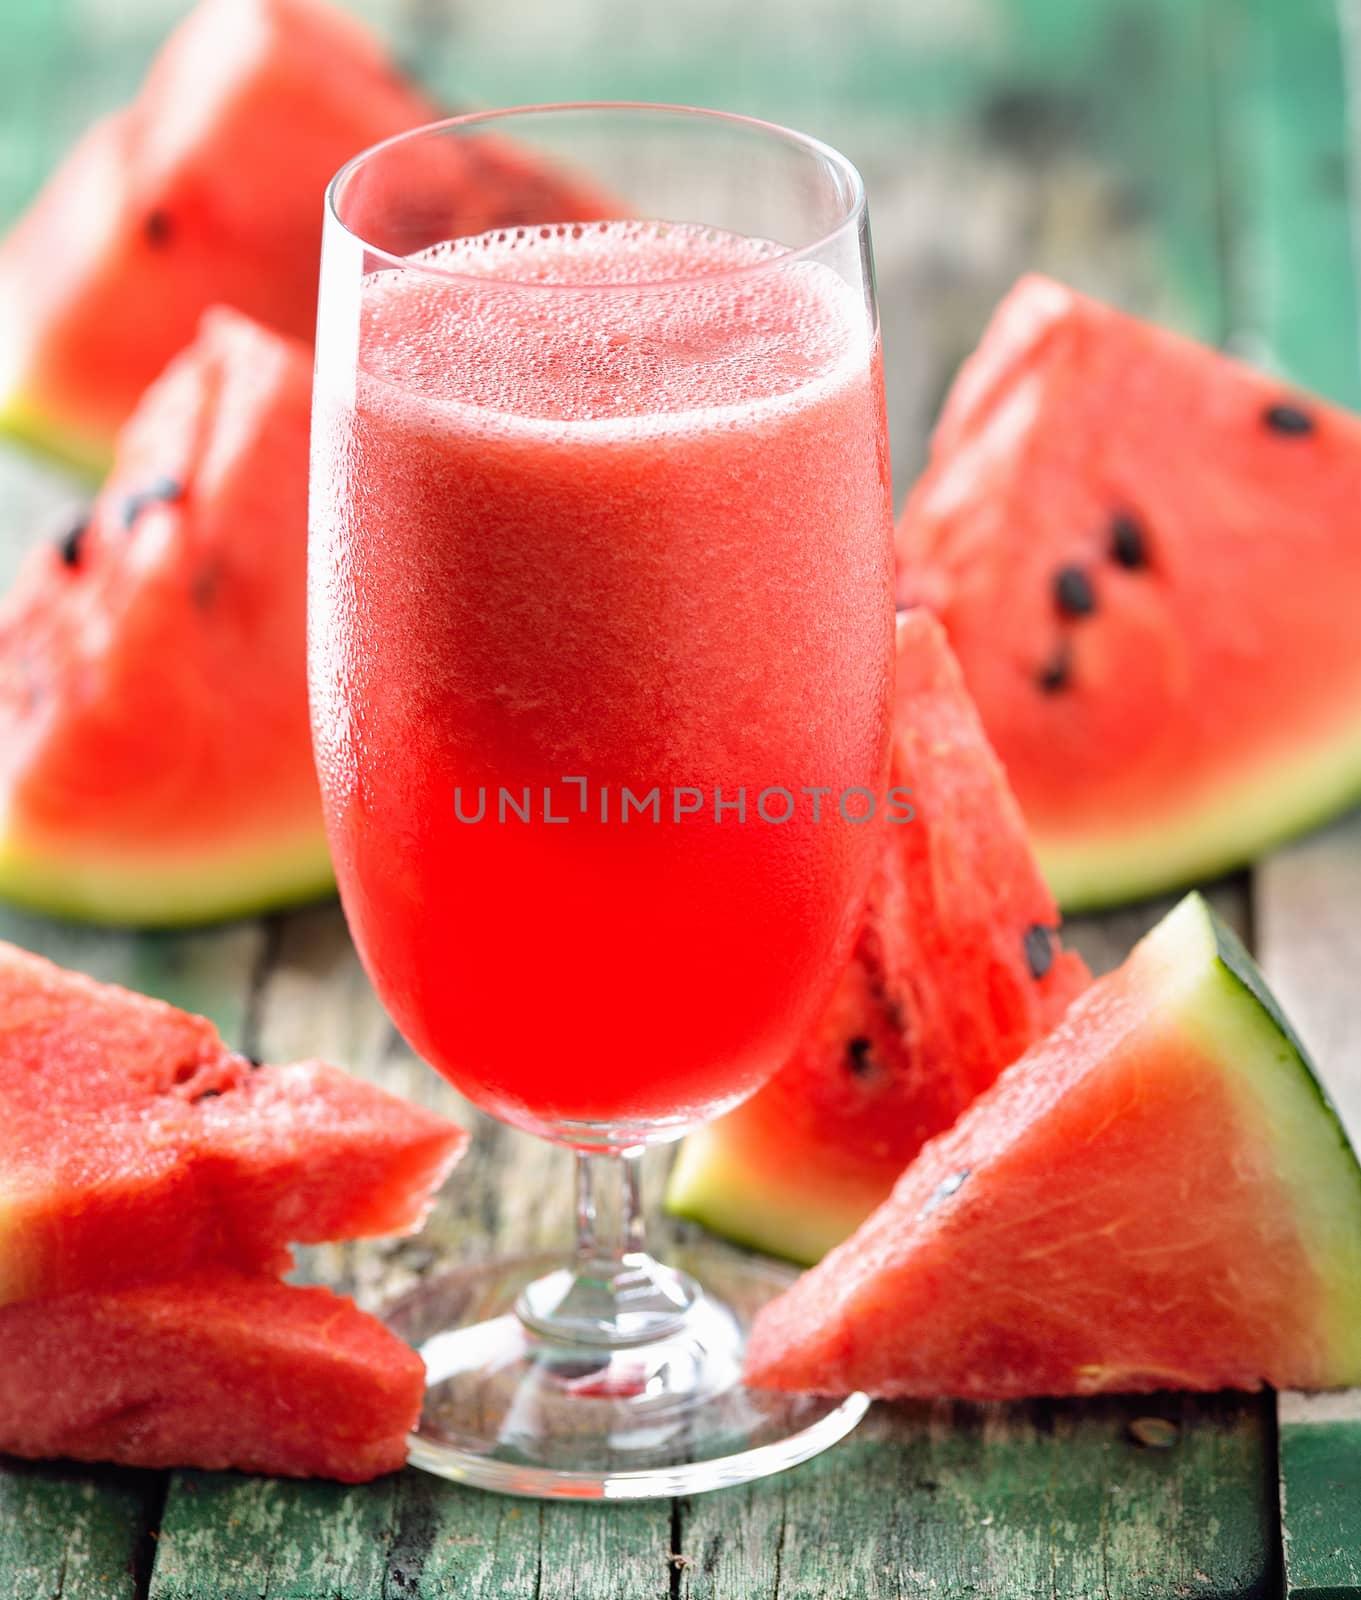 Watermelon drink in glasses with slices of watermelon by sommai